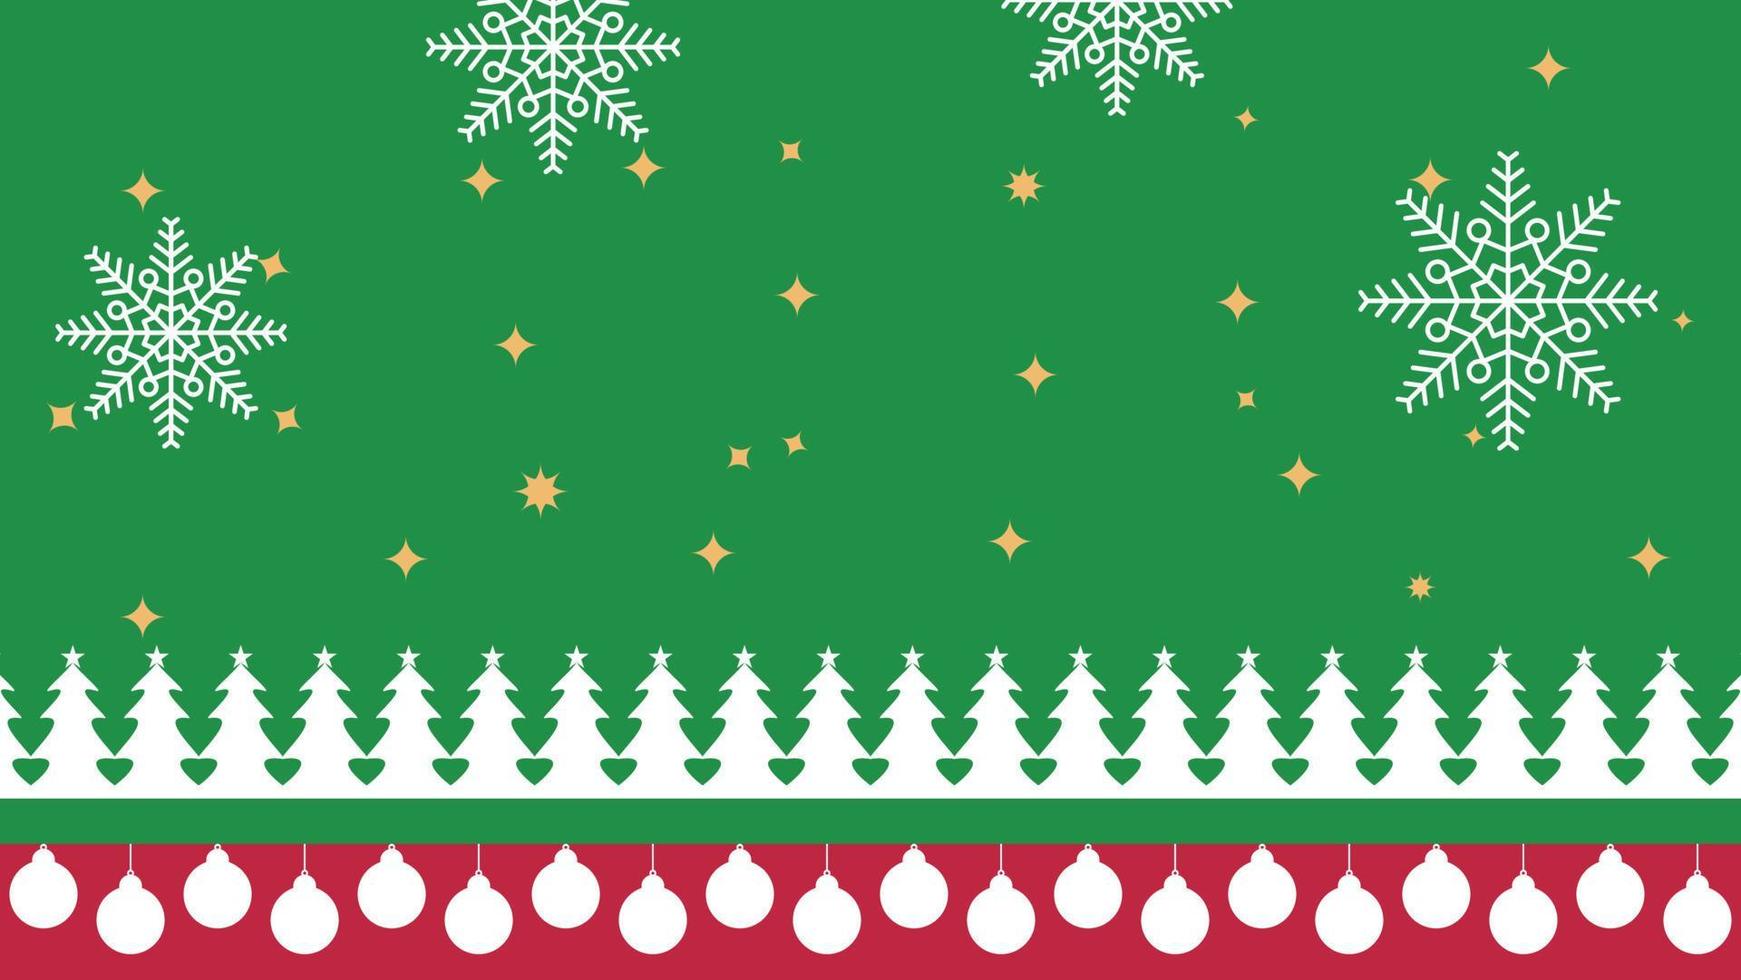 Red and green christmas banner backgroud with trees snowflakes and baubles vector